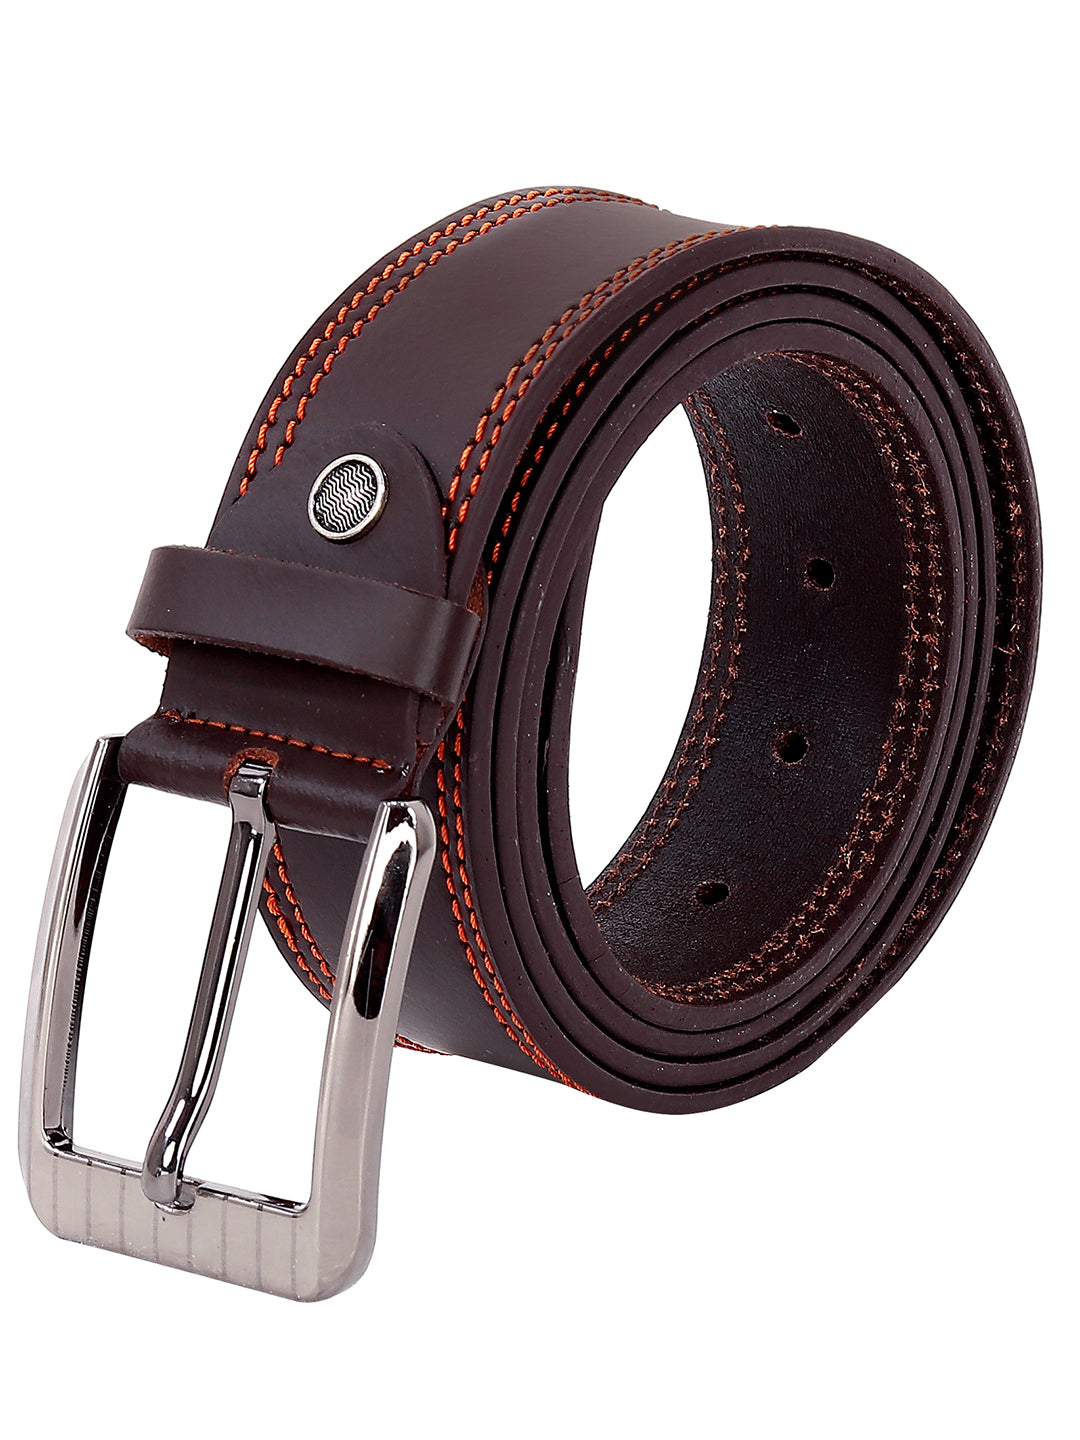 Leather World Formal Casual Brown Branded Stylish Genuine Leather Belts For Men